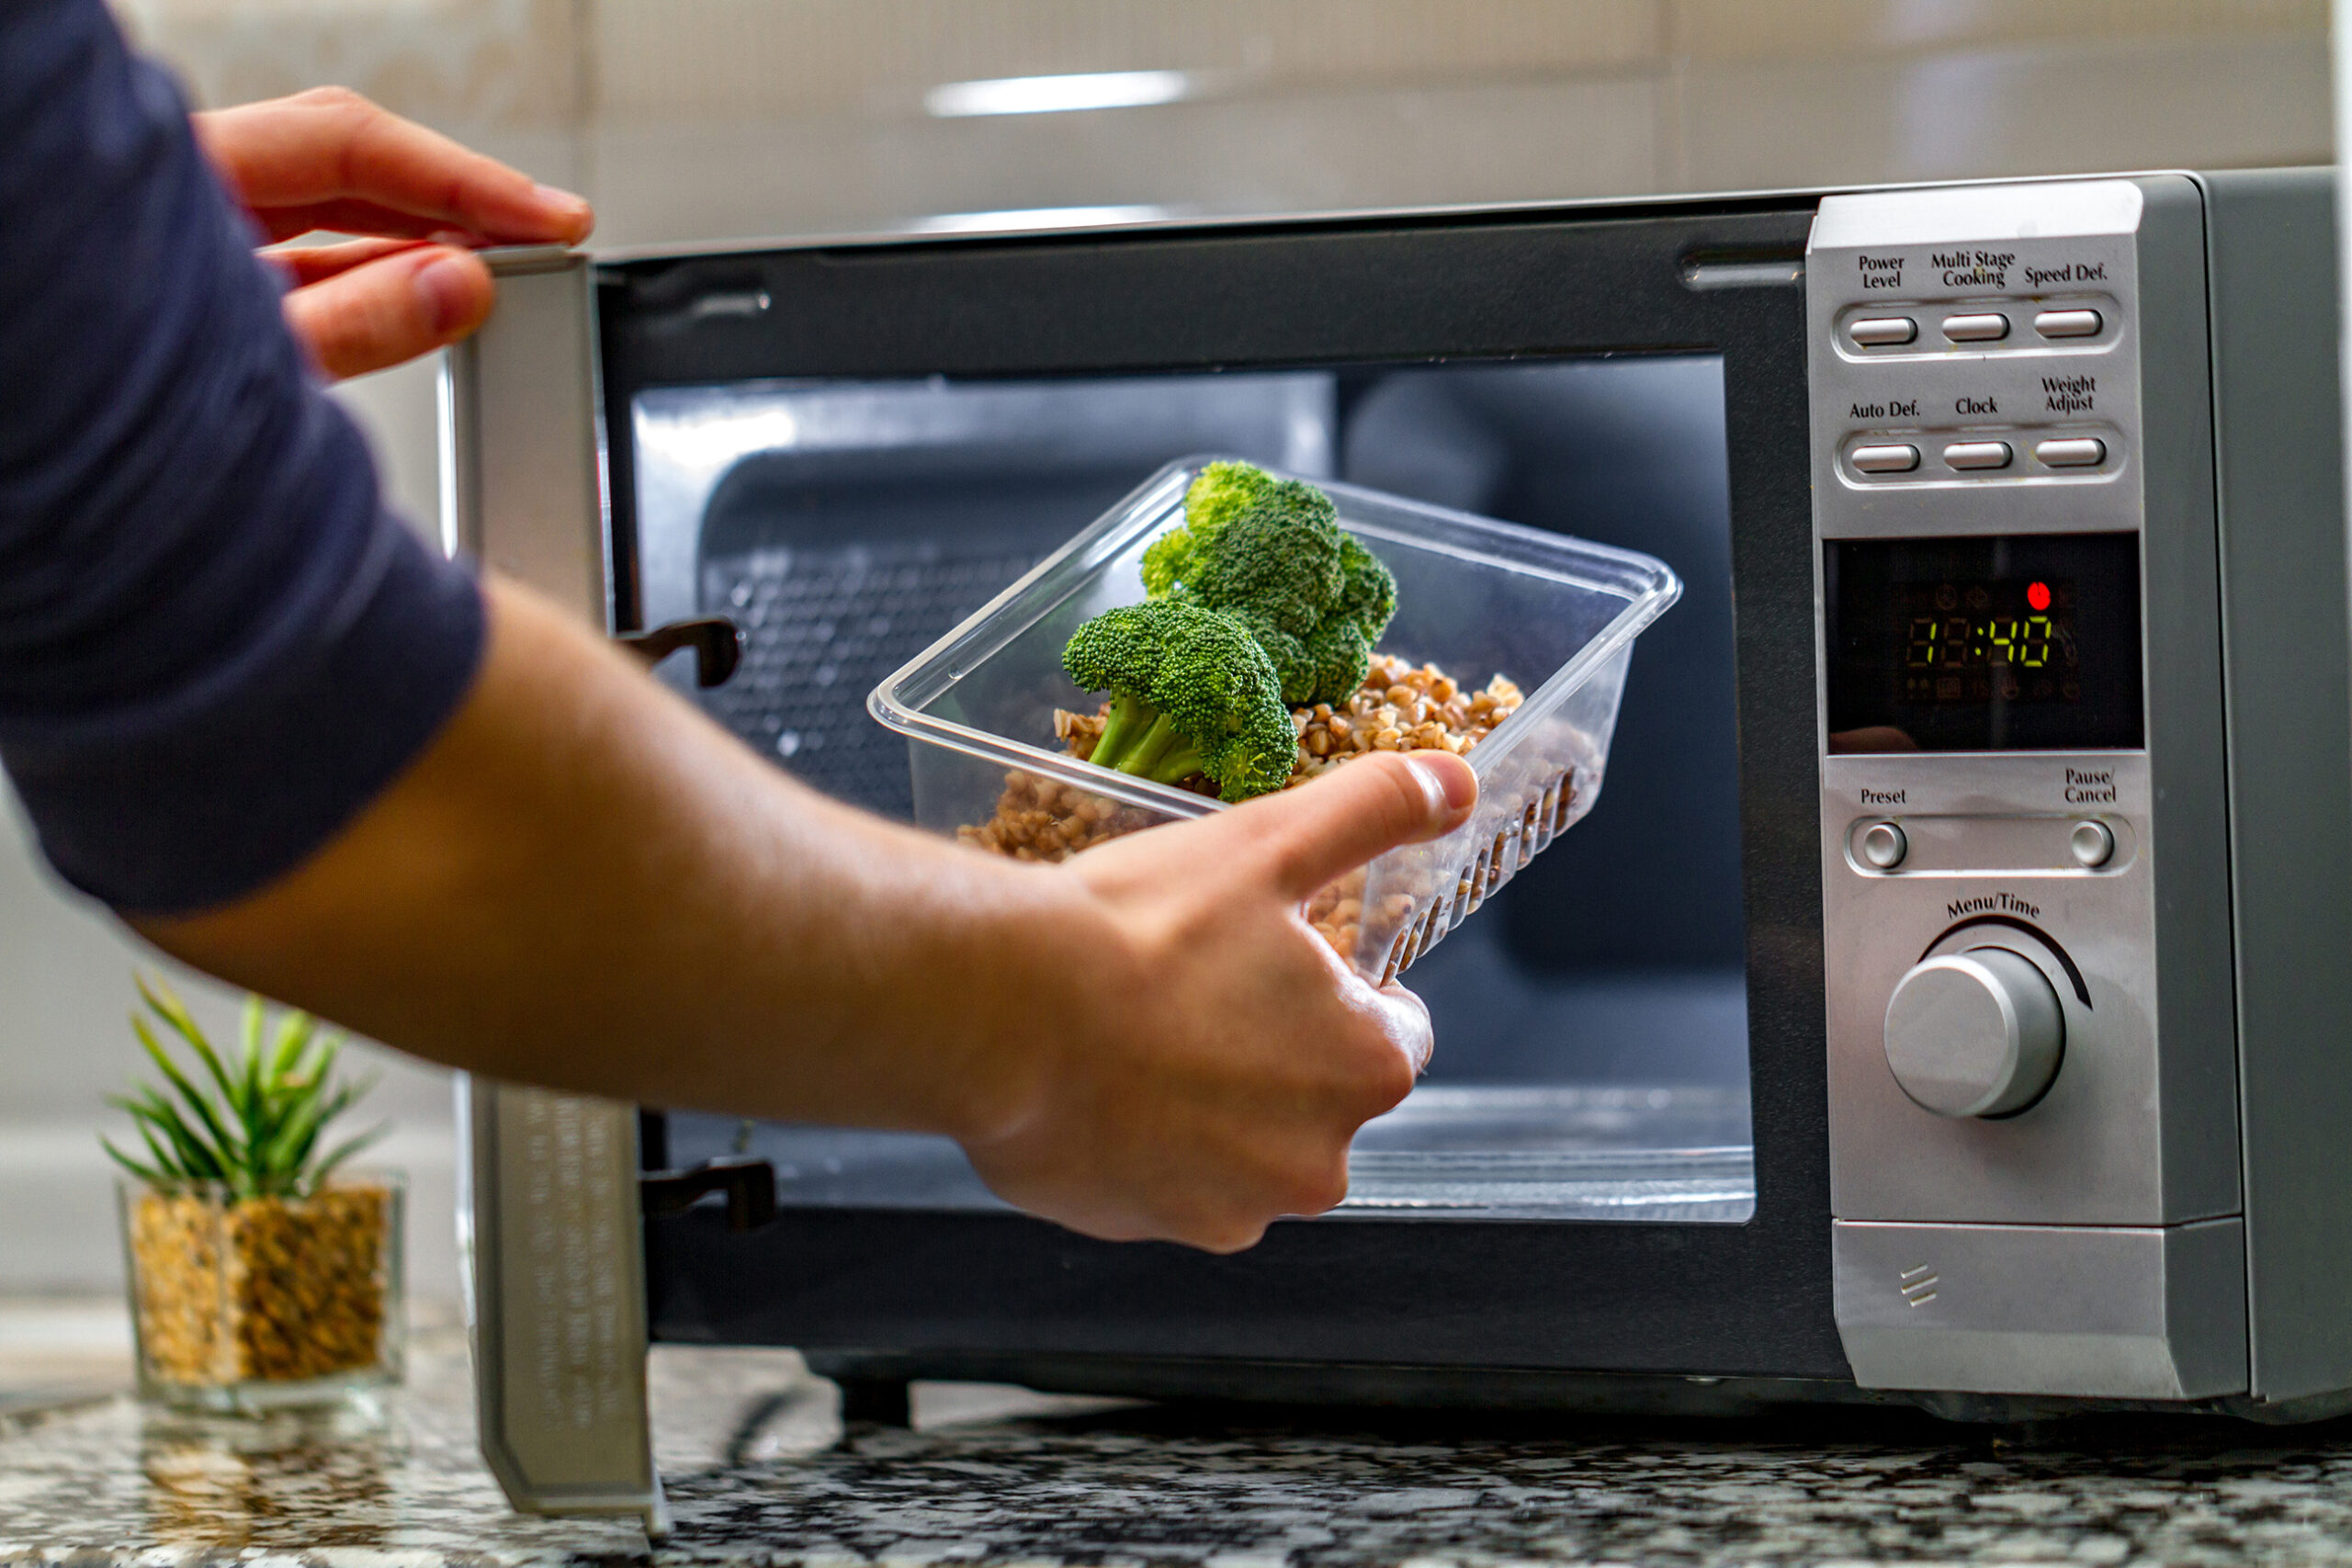 Microwave Safe Containers: A Business' Guide [VIDEO]